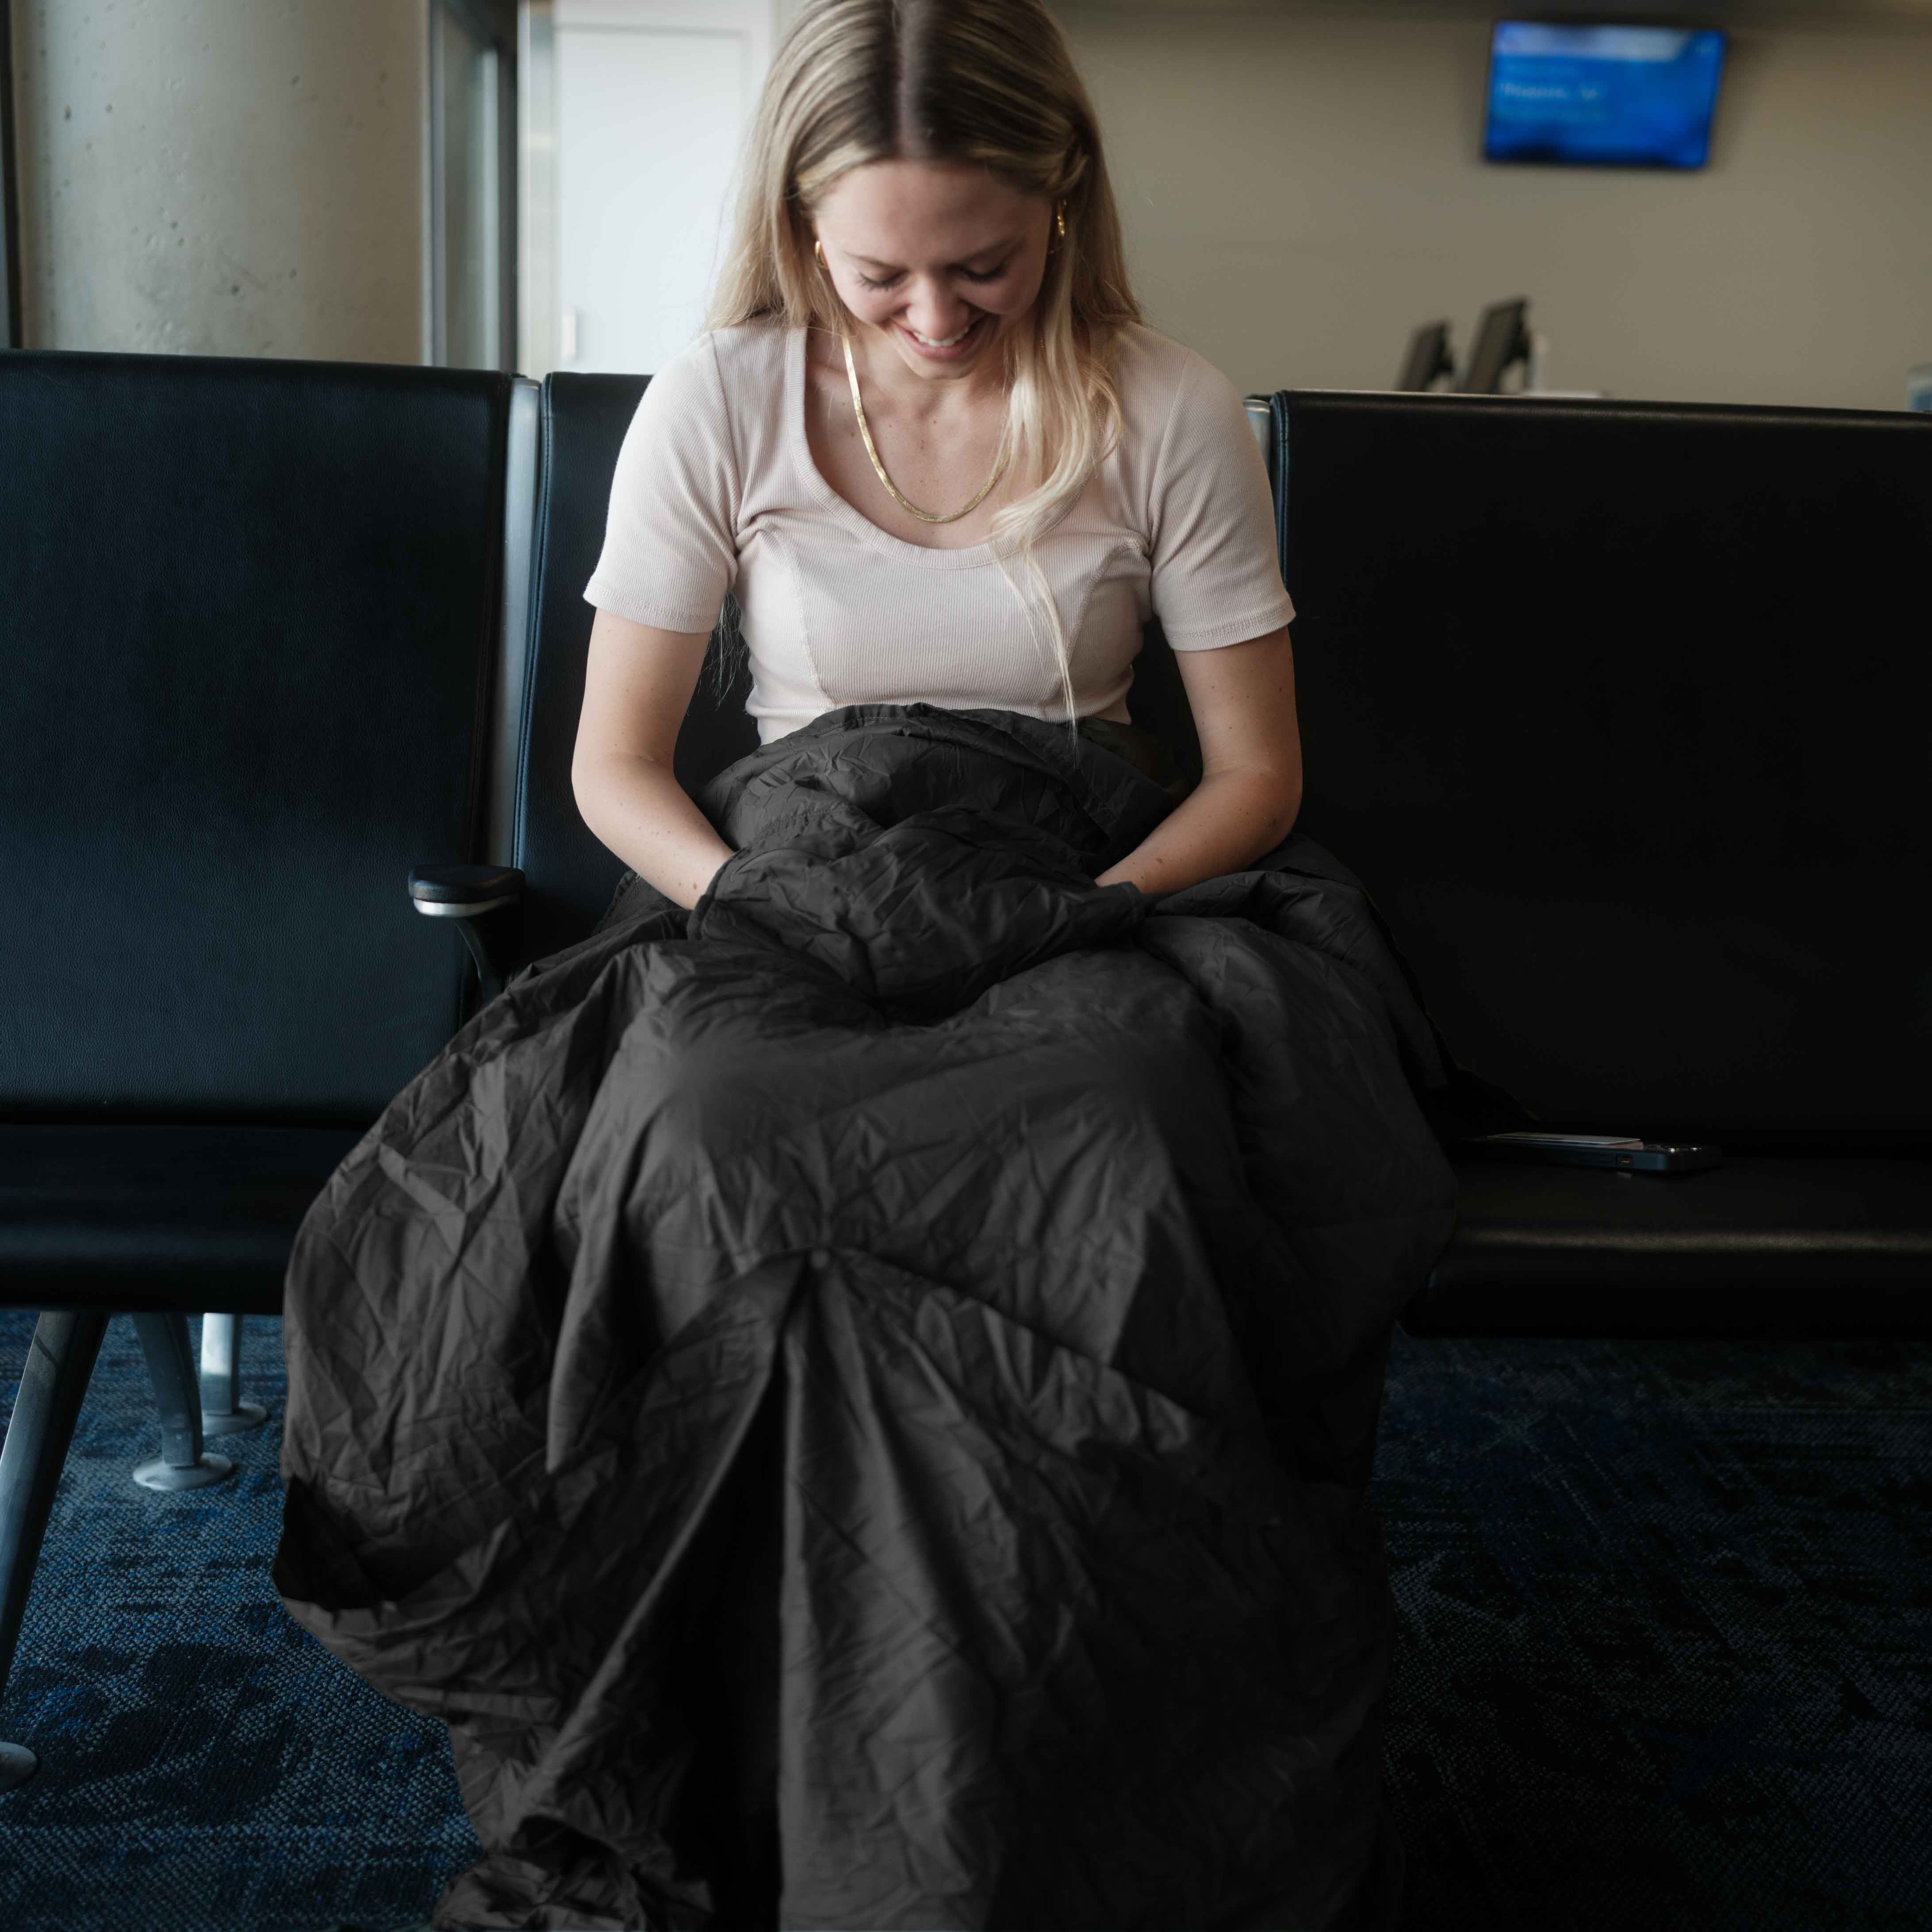 Layover™ XL Travel Blanket - Insulated & Packable | Black